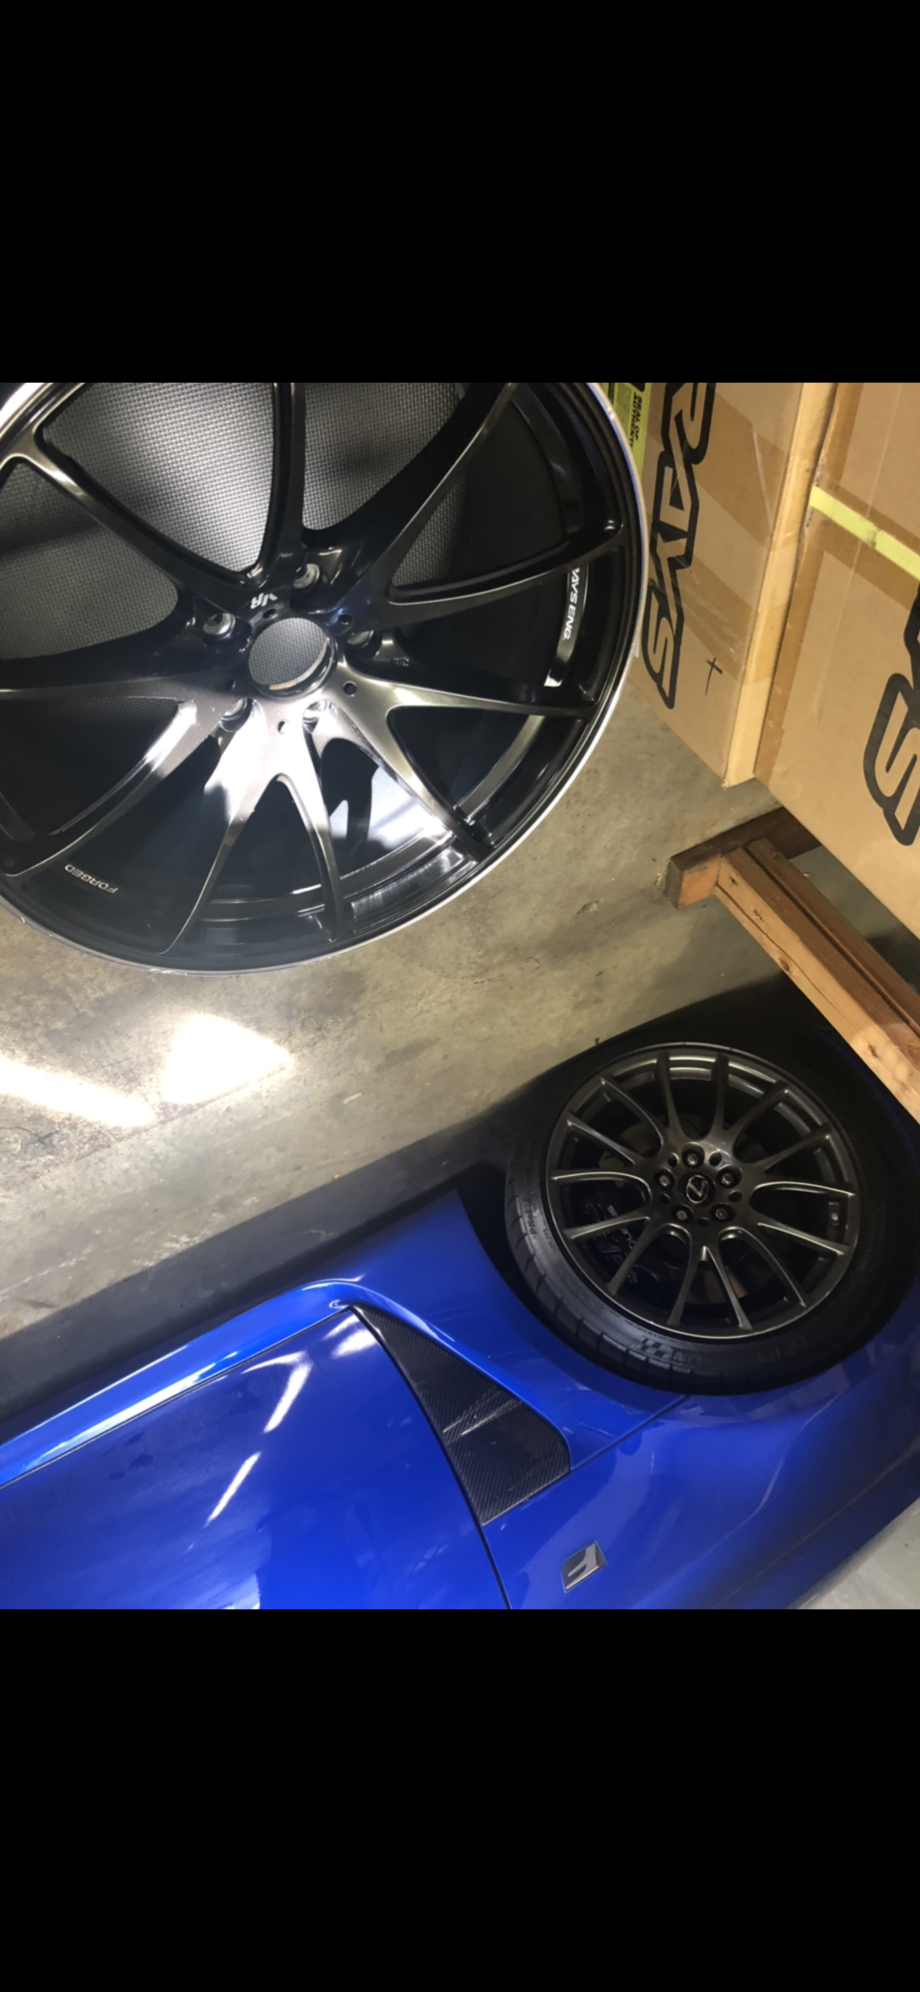 Wheels and Tires/Axles - WTS or WTT SoCal Volk Rays G25 Formula Silver Black Clear $2000 or ISF 2012 Wheels - Used - 2008 to 2014 Lexus IS F - Los Angeles, CA 90007, United States